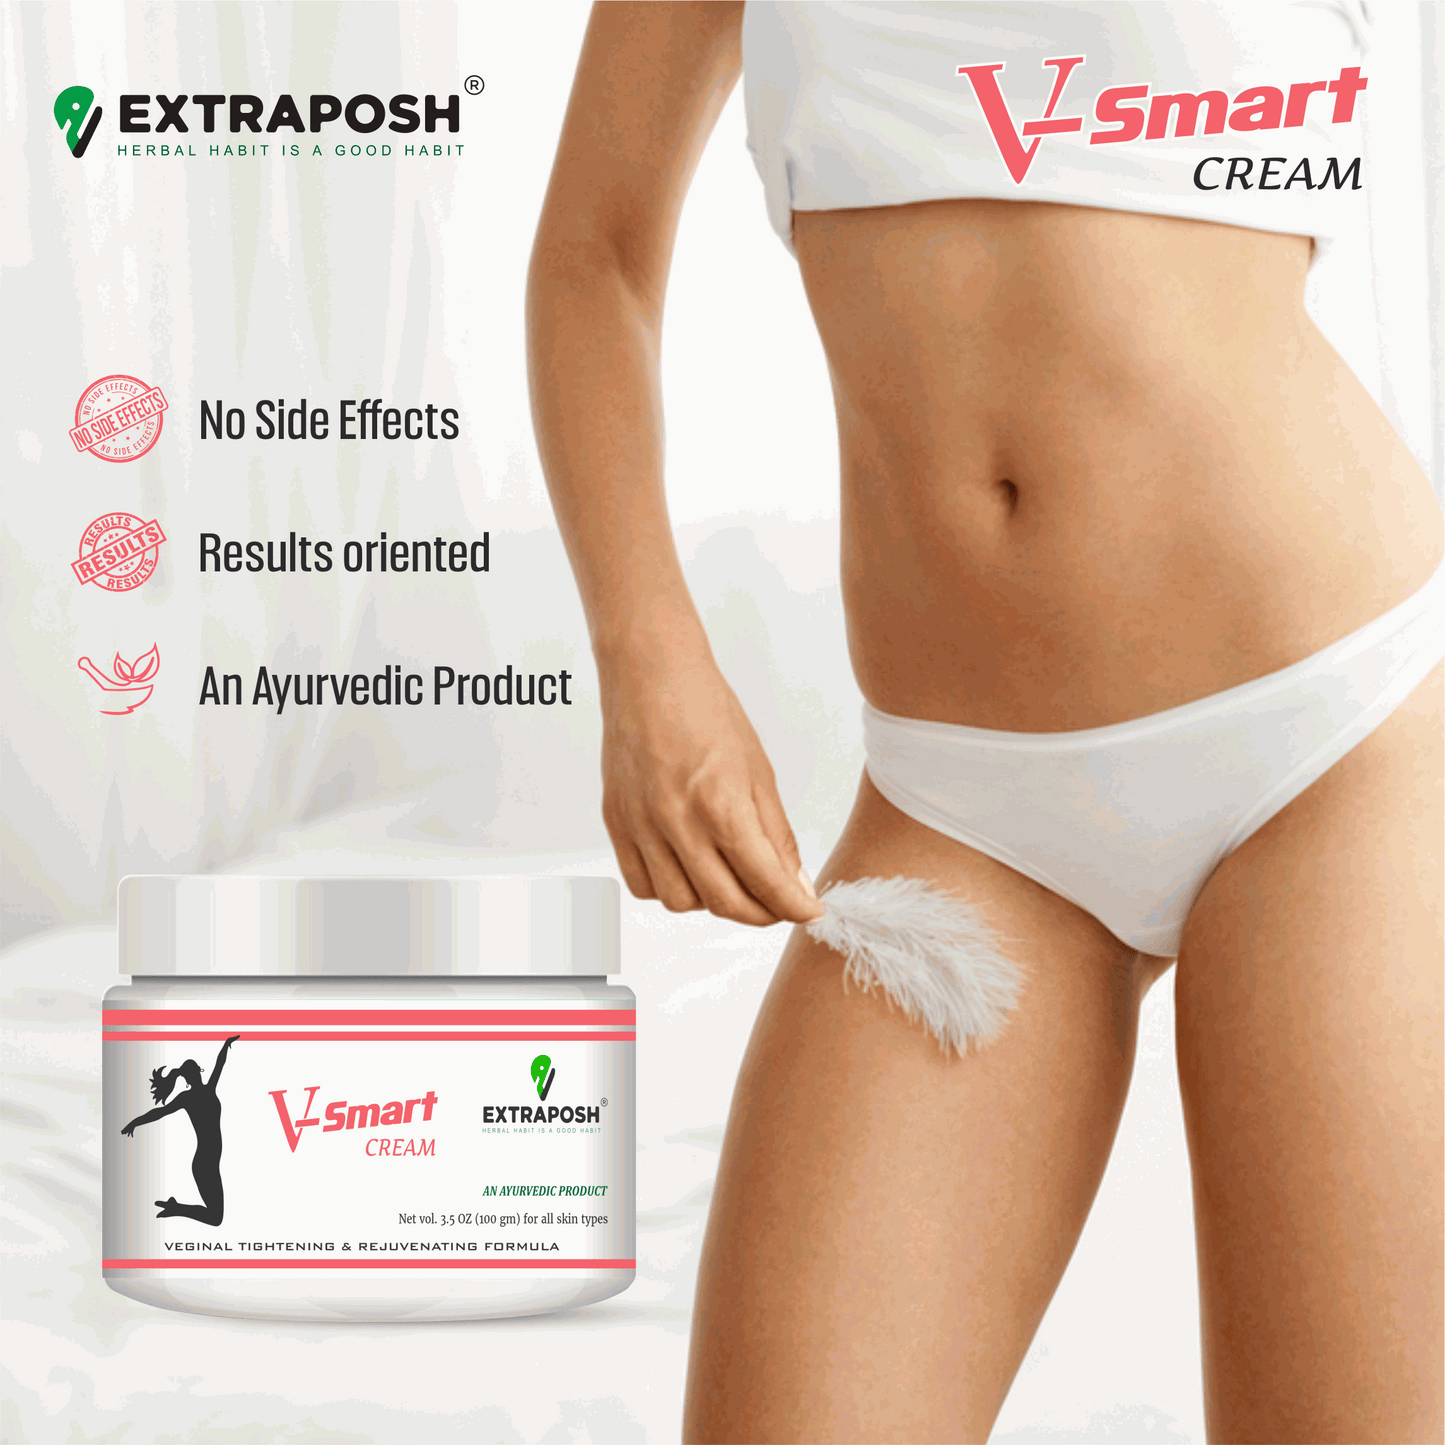 natural vaginal tightening by ayurvedic formulation gives best results without any side effects